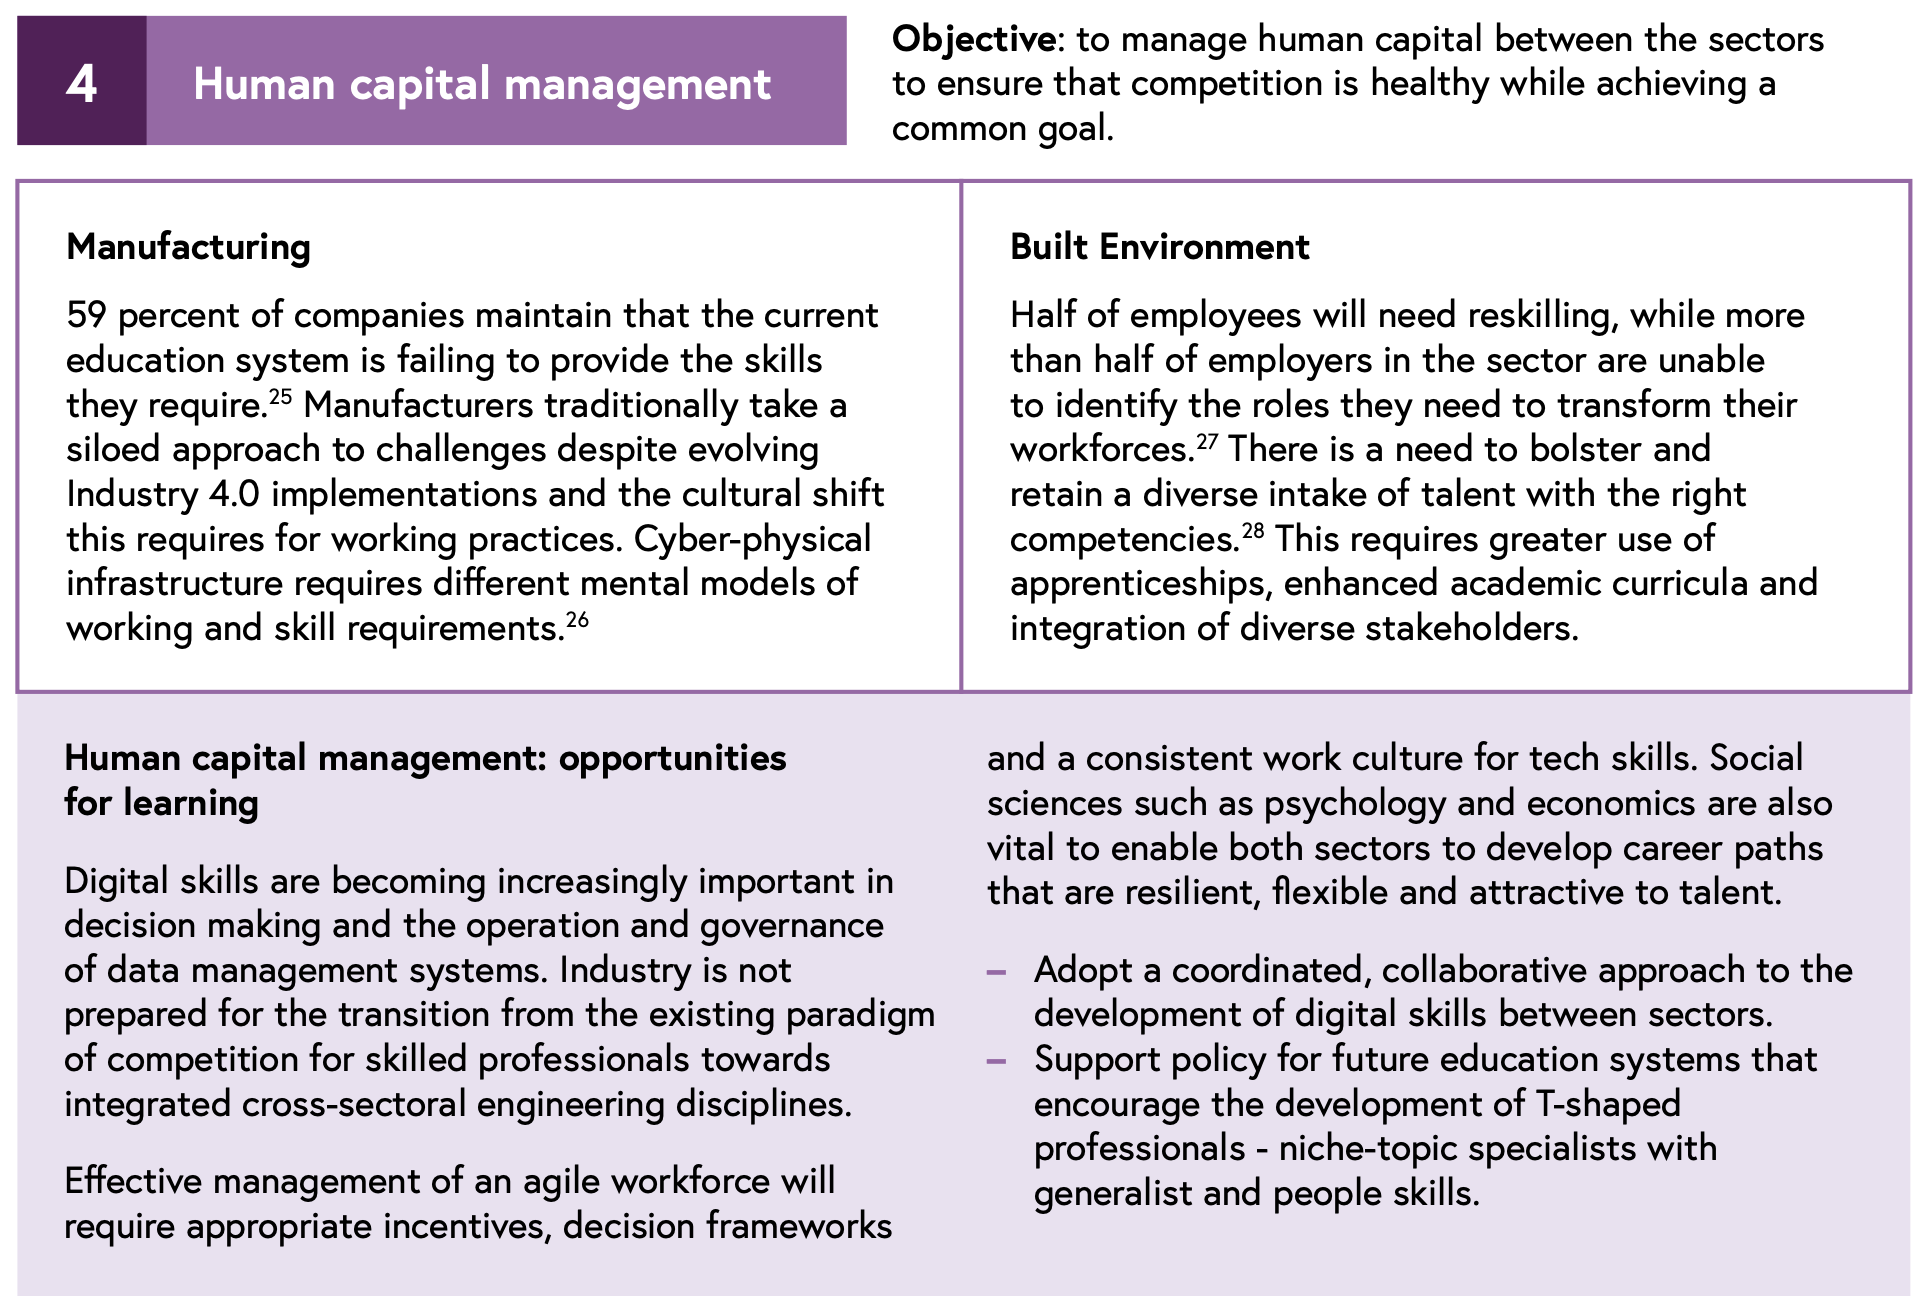 Extract from ‘The Apollo Protocol: unifying digital twins across sectors’ White Paper